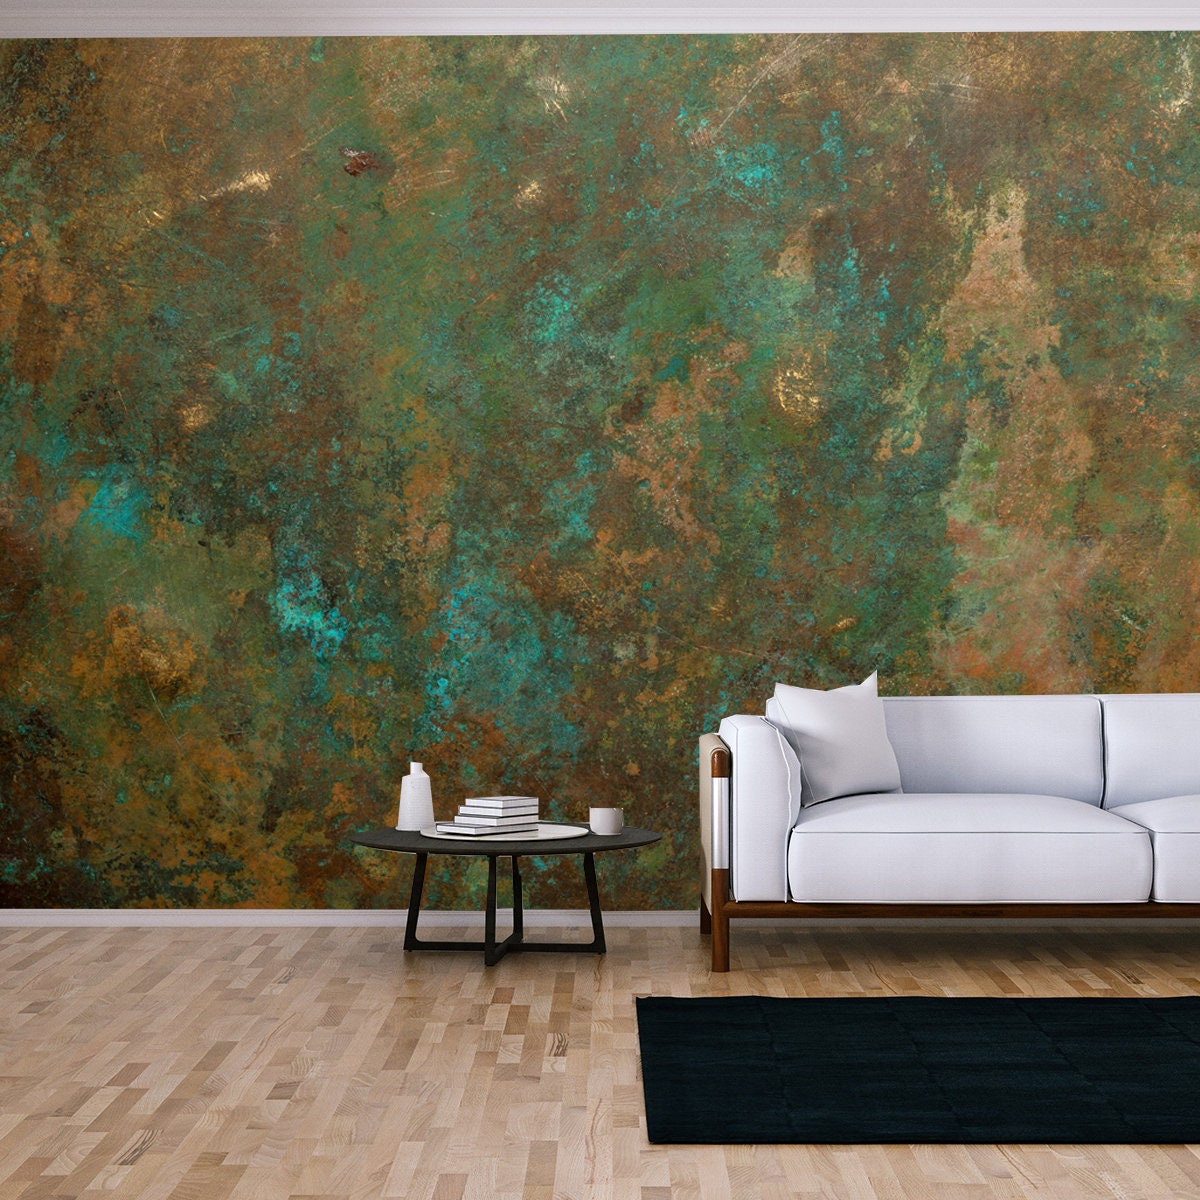 Background Image of Old Copper Vessel Texture Wallpaper Living Room Mural